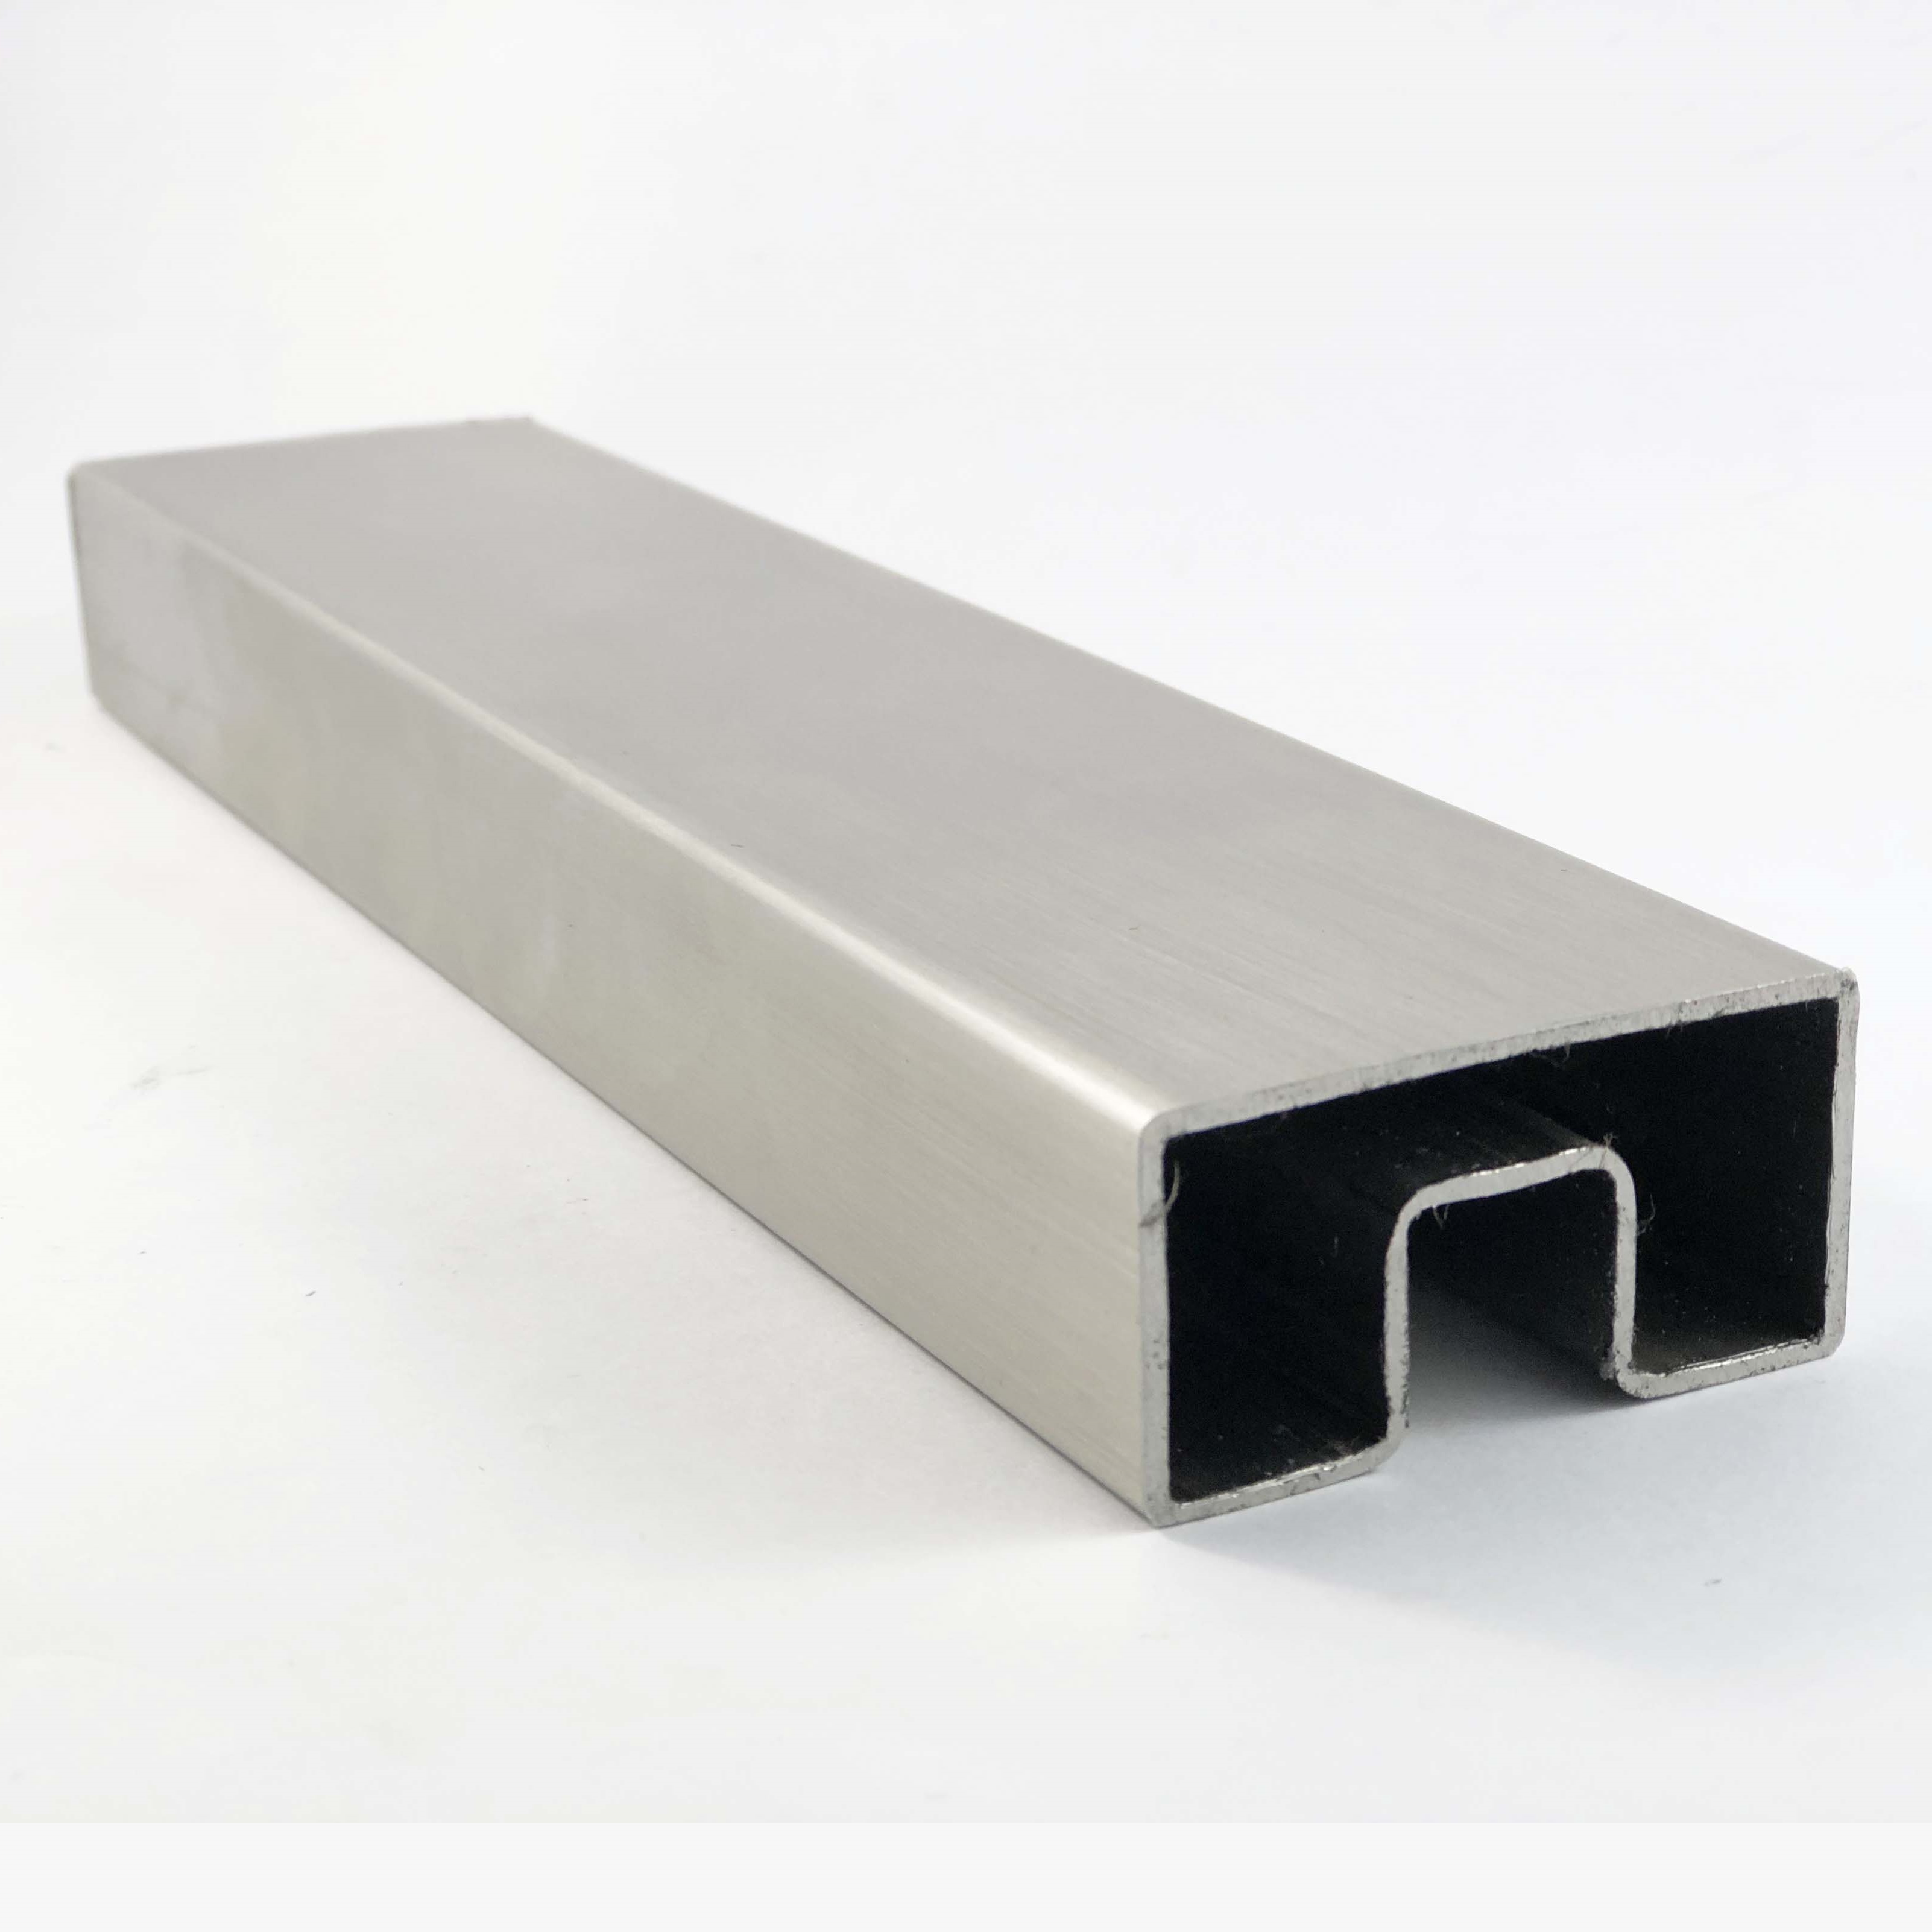 Tube Slotted 25mm x 50mm Stainless Steel 5800mm - Satin